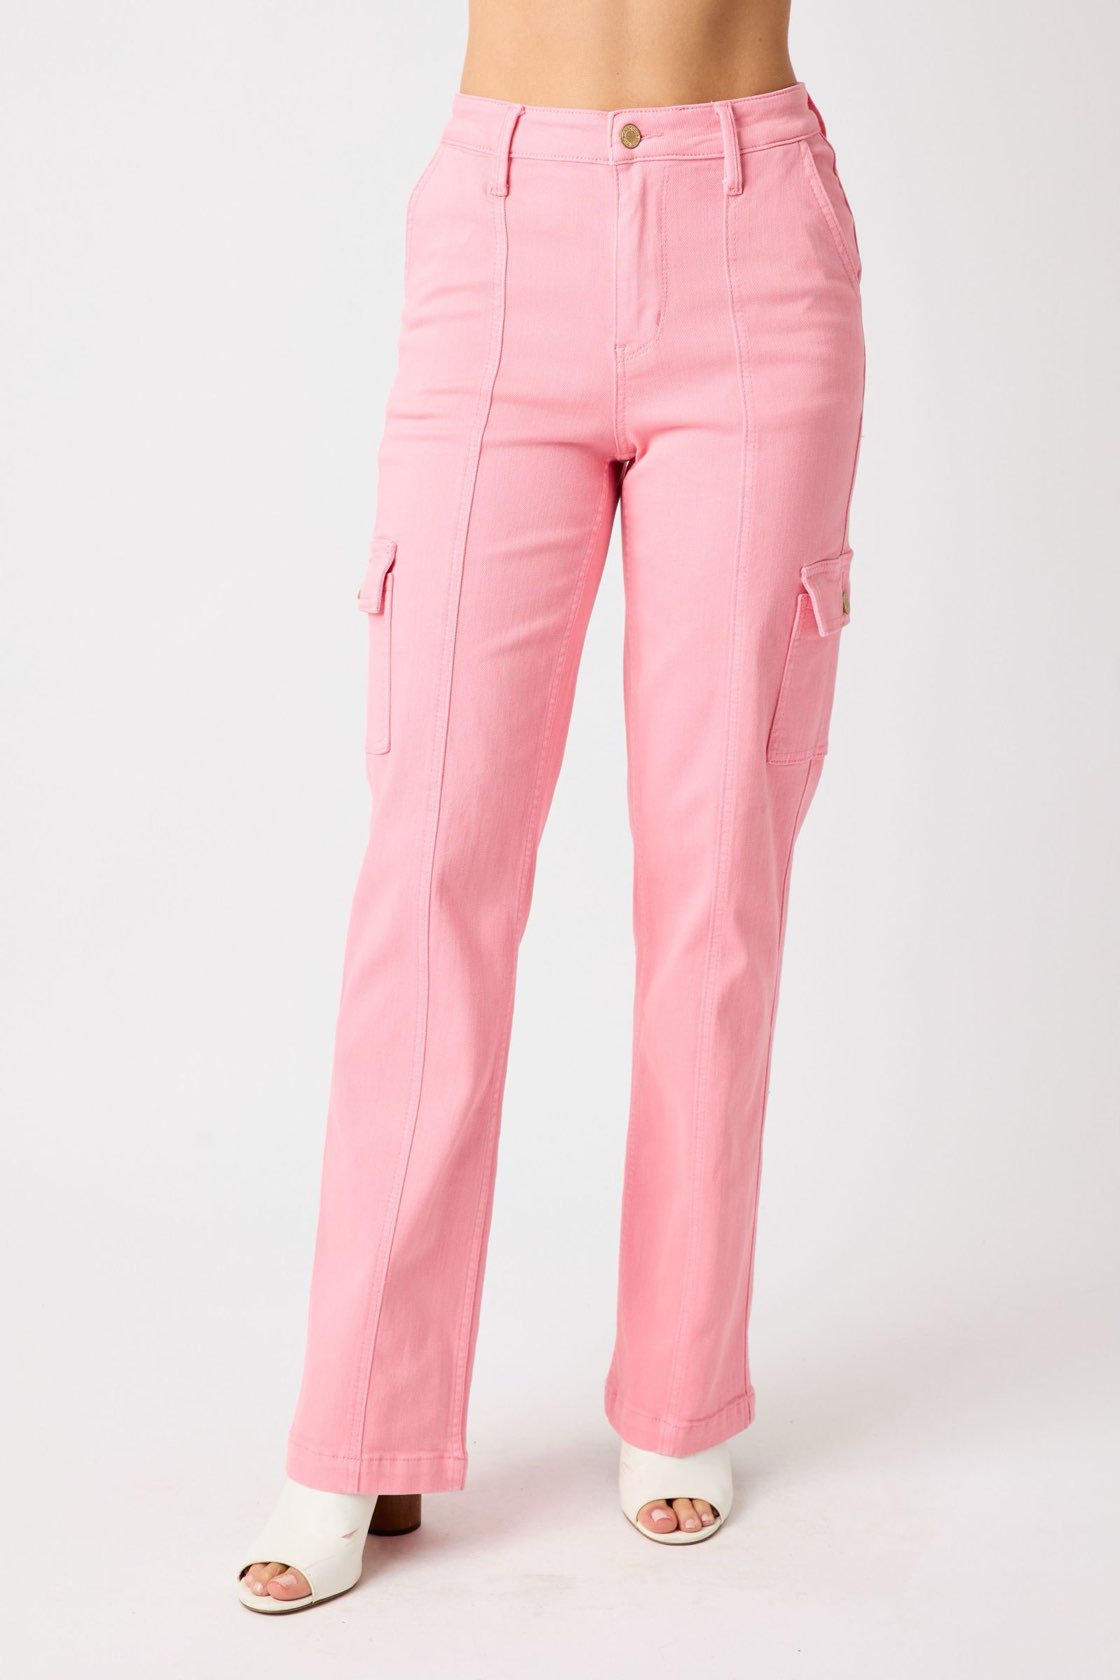 In The Pink Straight Cargo Judy Blue Jeans